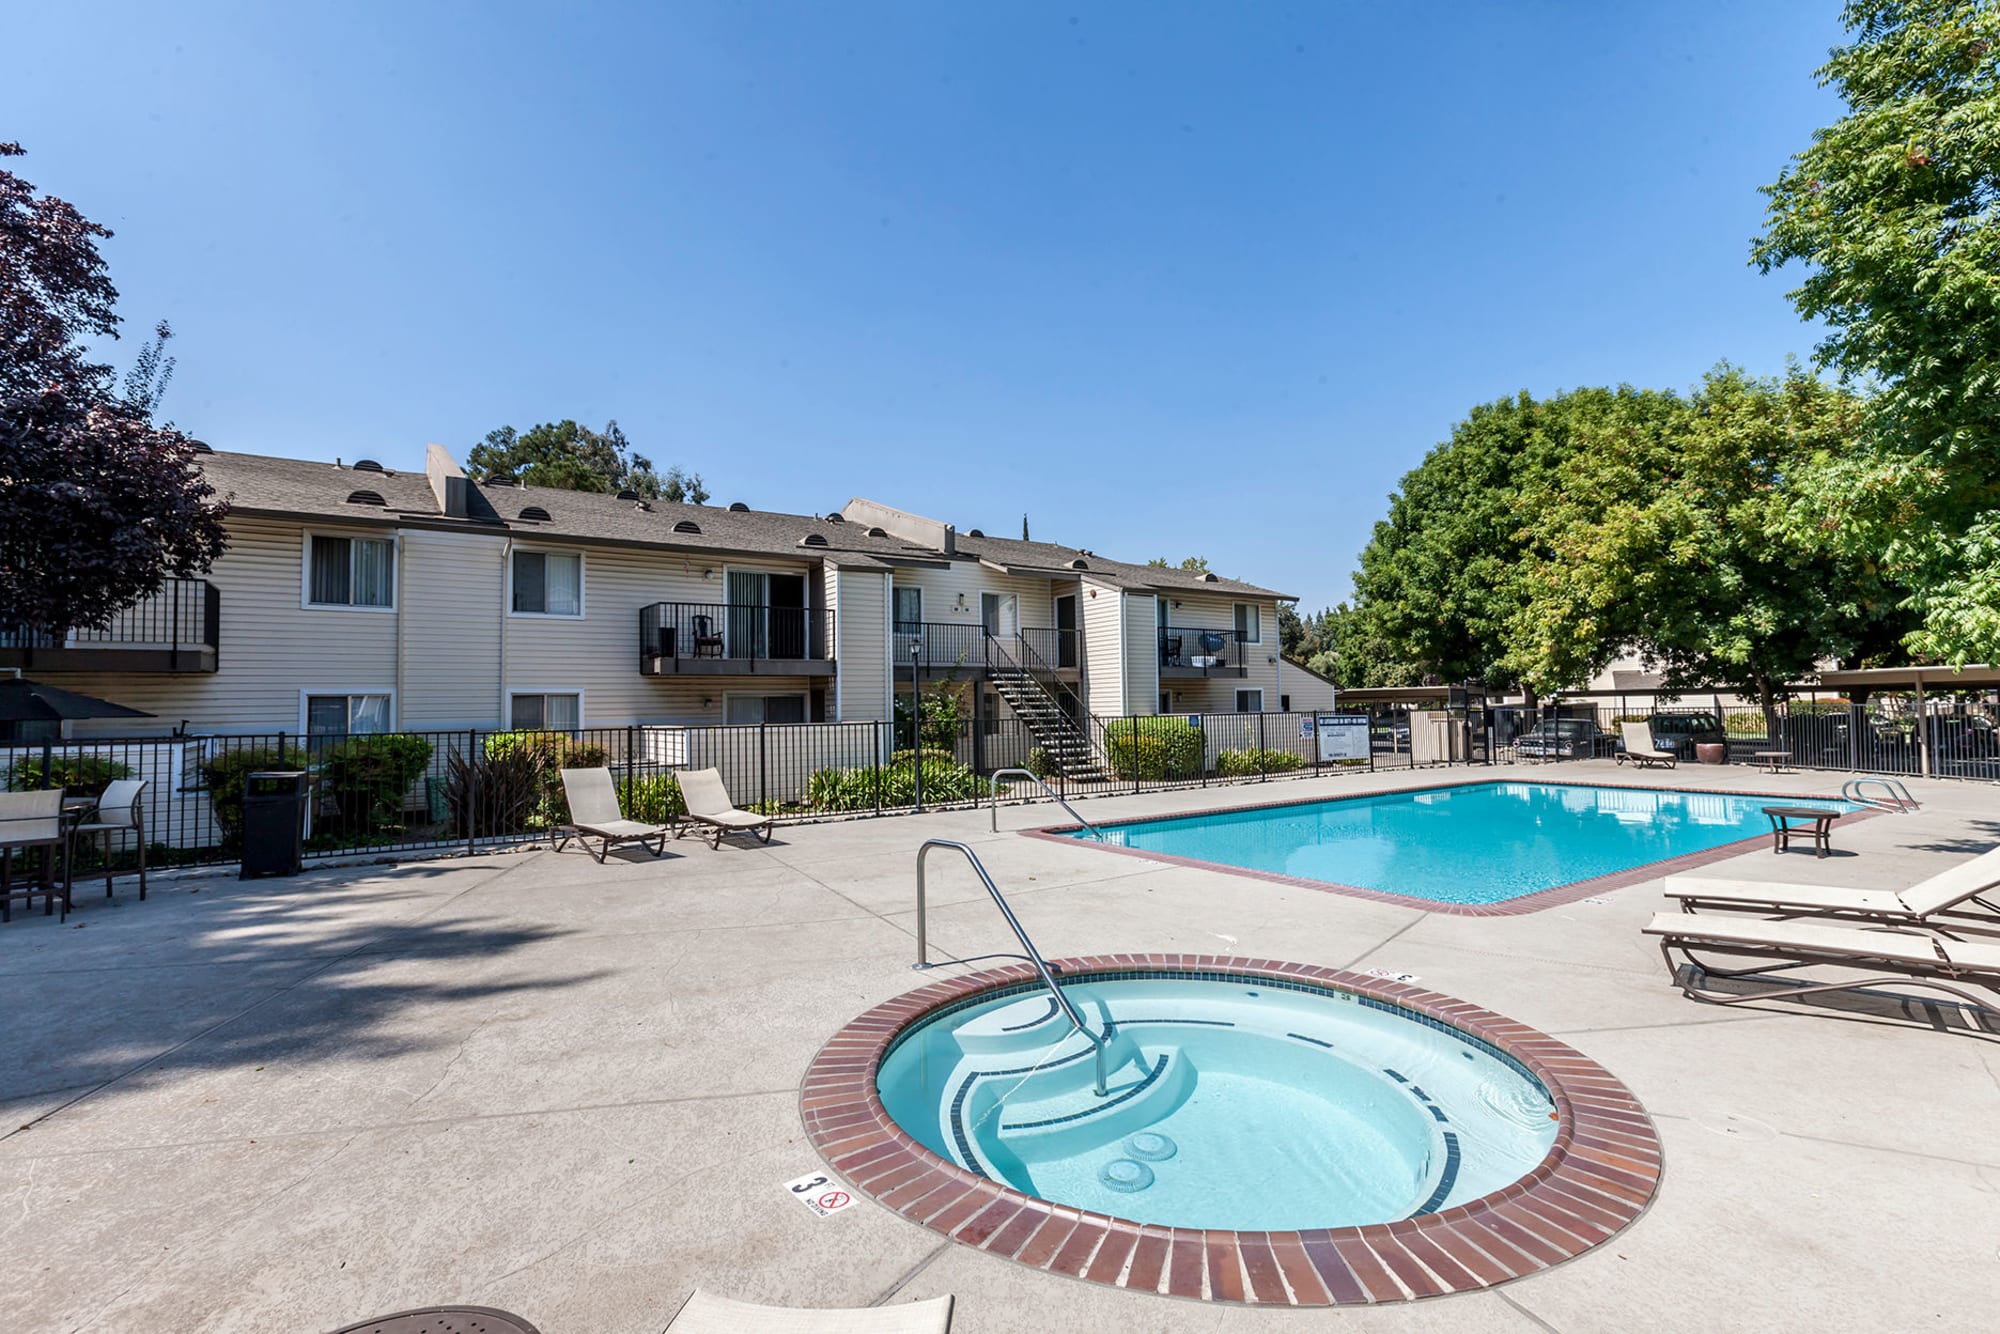 The outdoor hot tub and swimming pool at The Woodlands Apartments in Sacramento, California